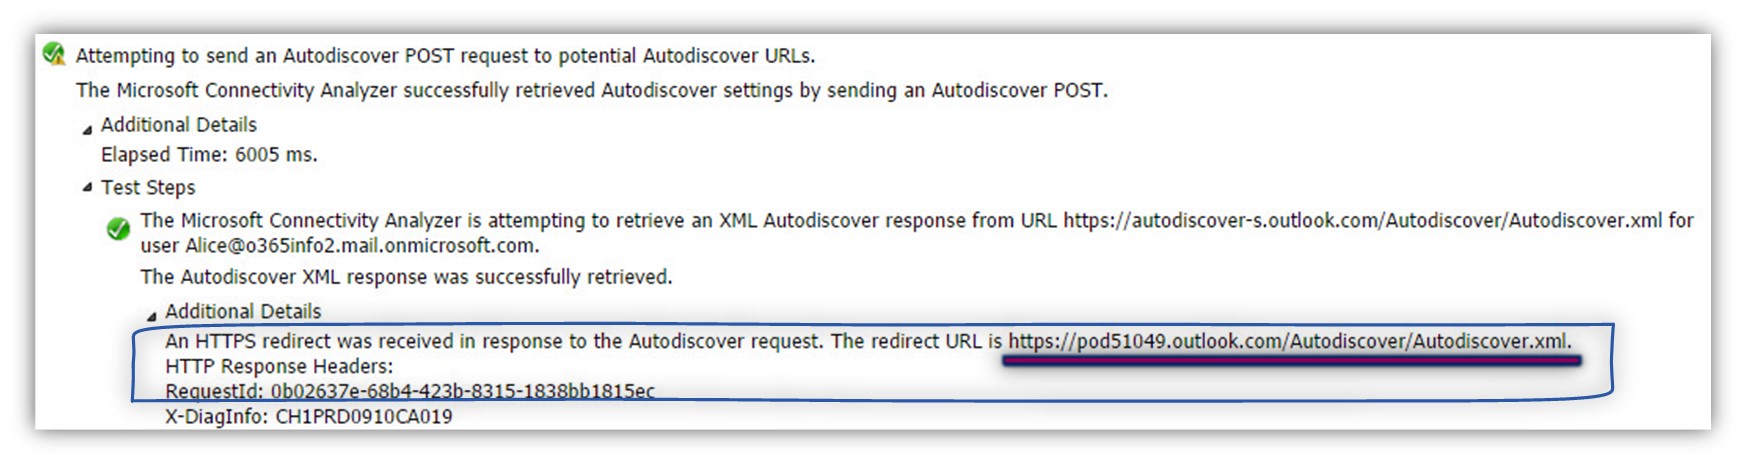 Step 23 of 30- Attempting to send an Autodiscover POST request to autodiscover-s.outlook.com-02